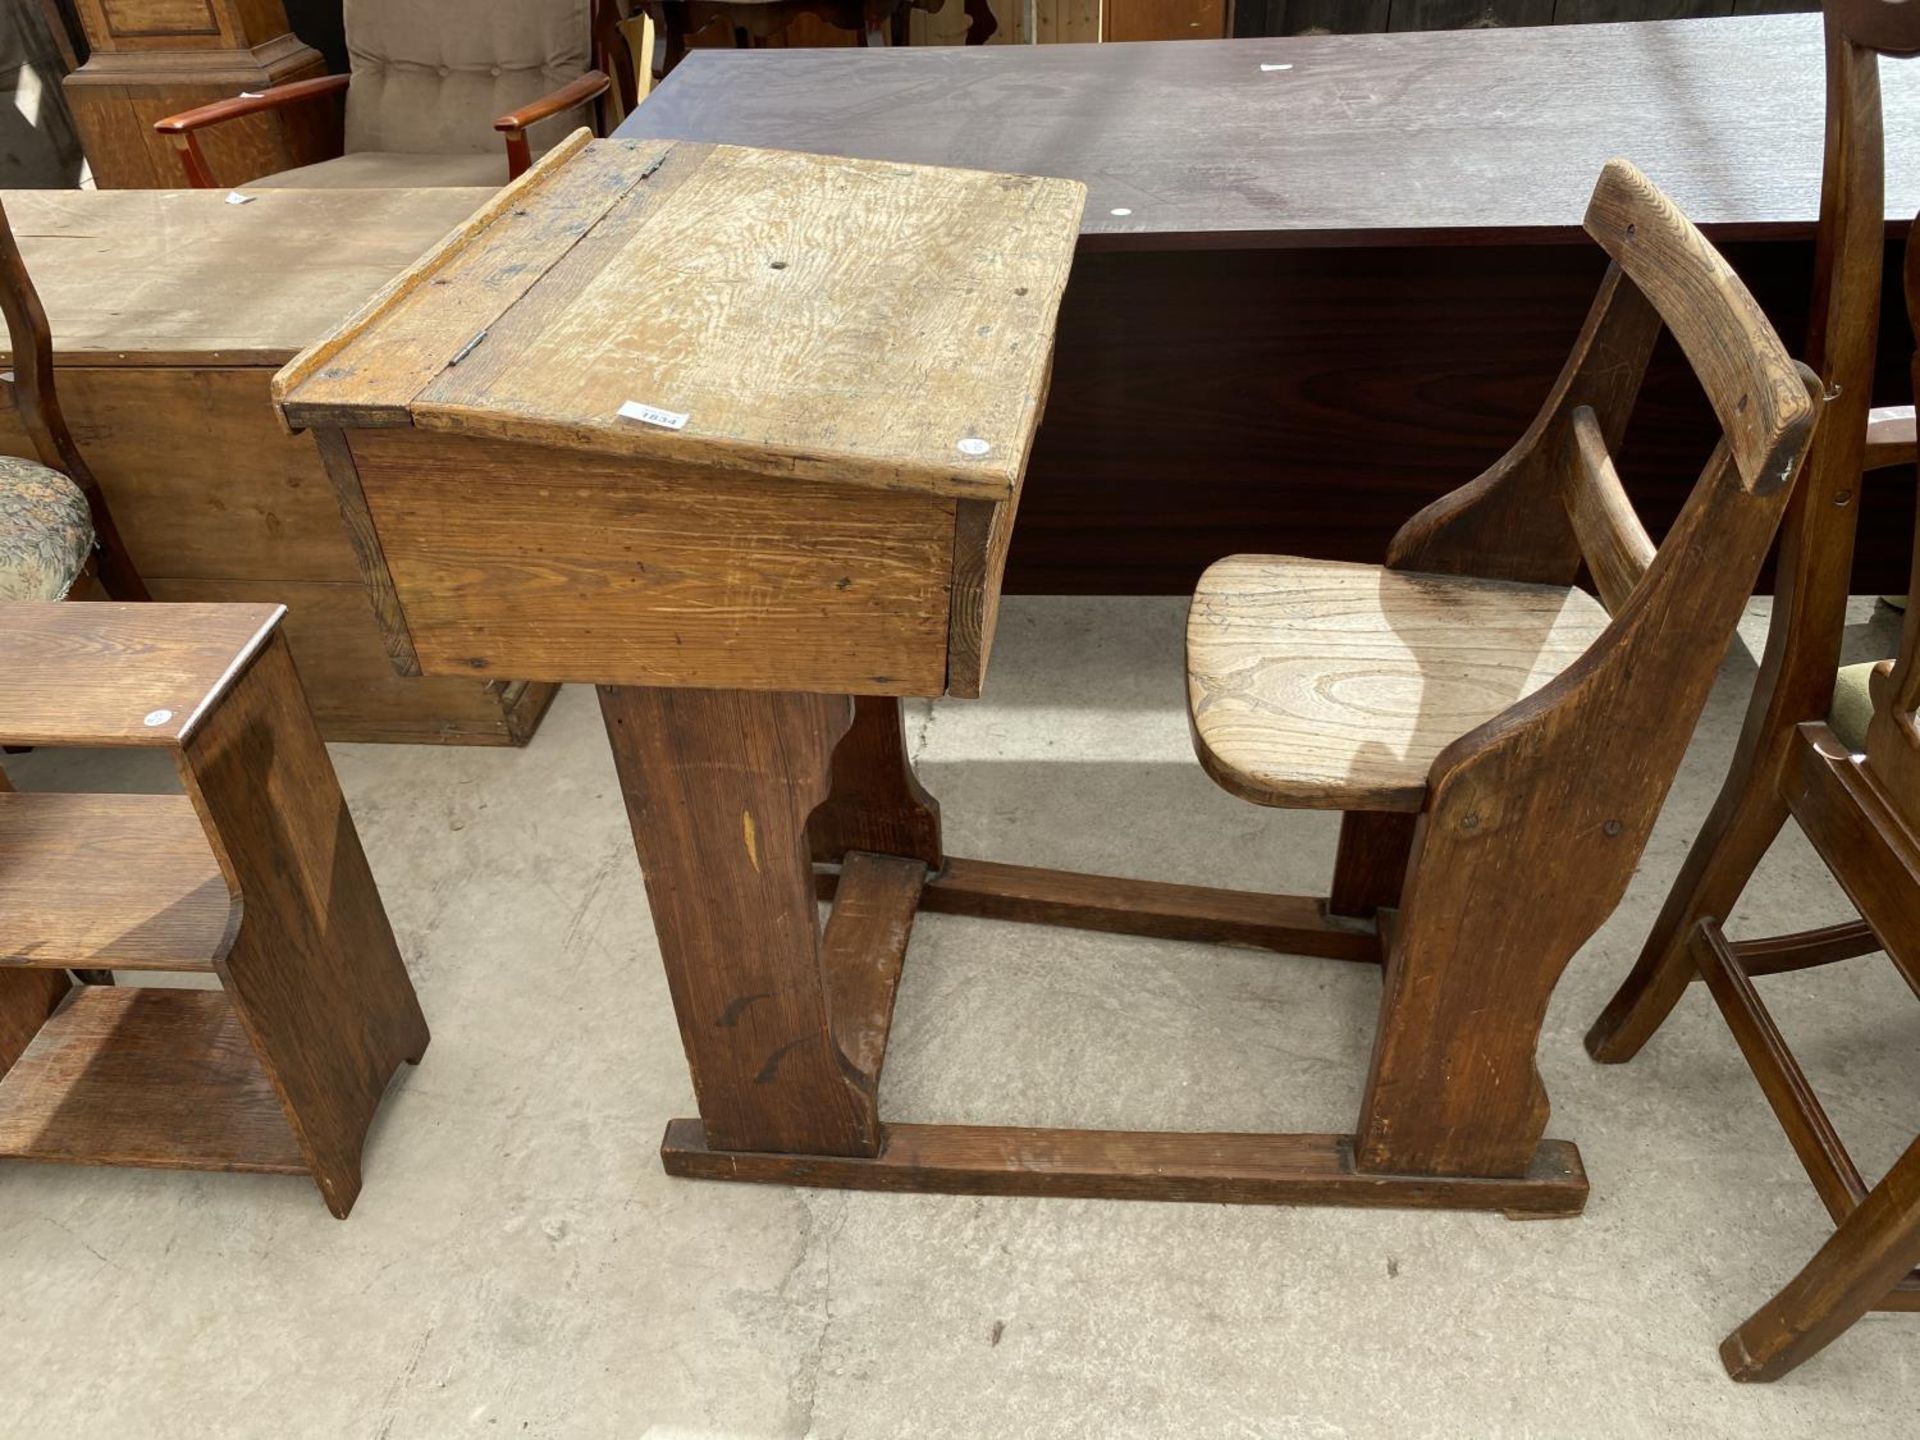 A VICTORIAN PITCH PINE SCHOOL DESK AND CHAIR